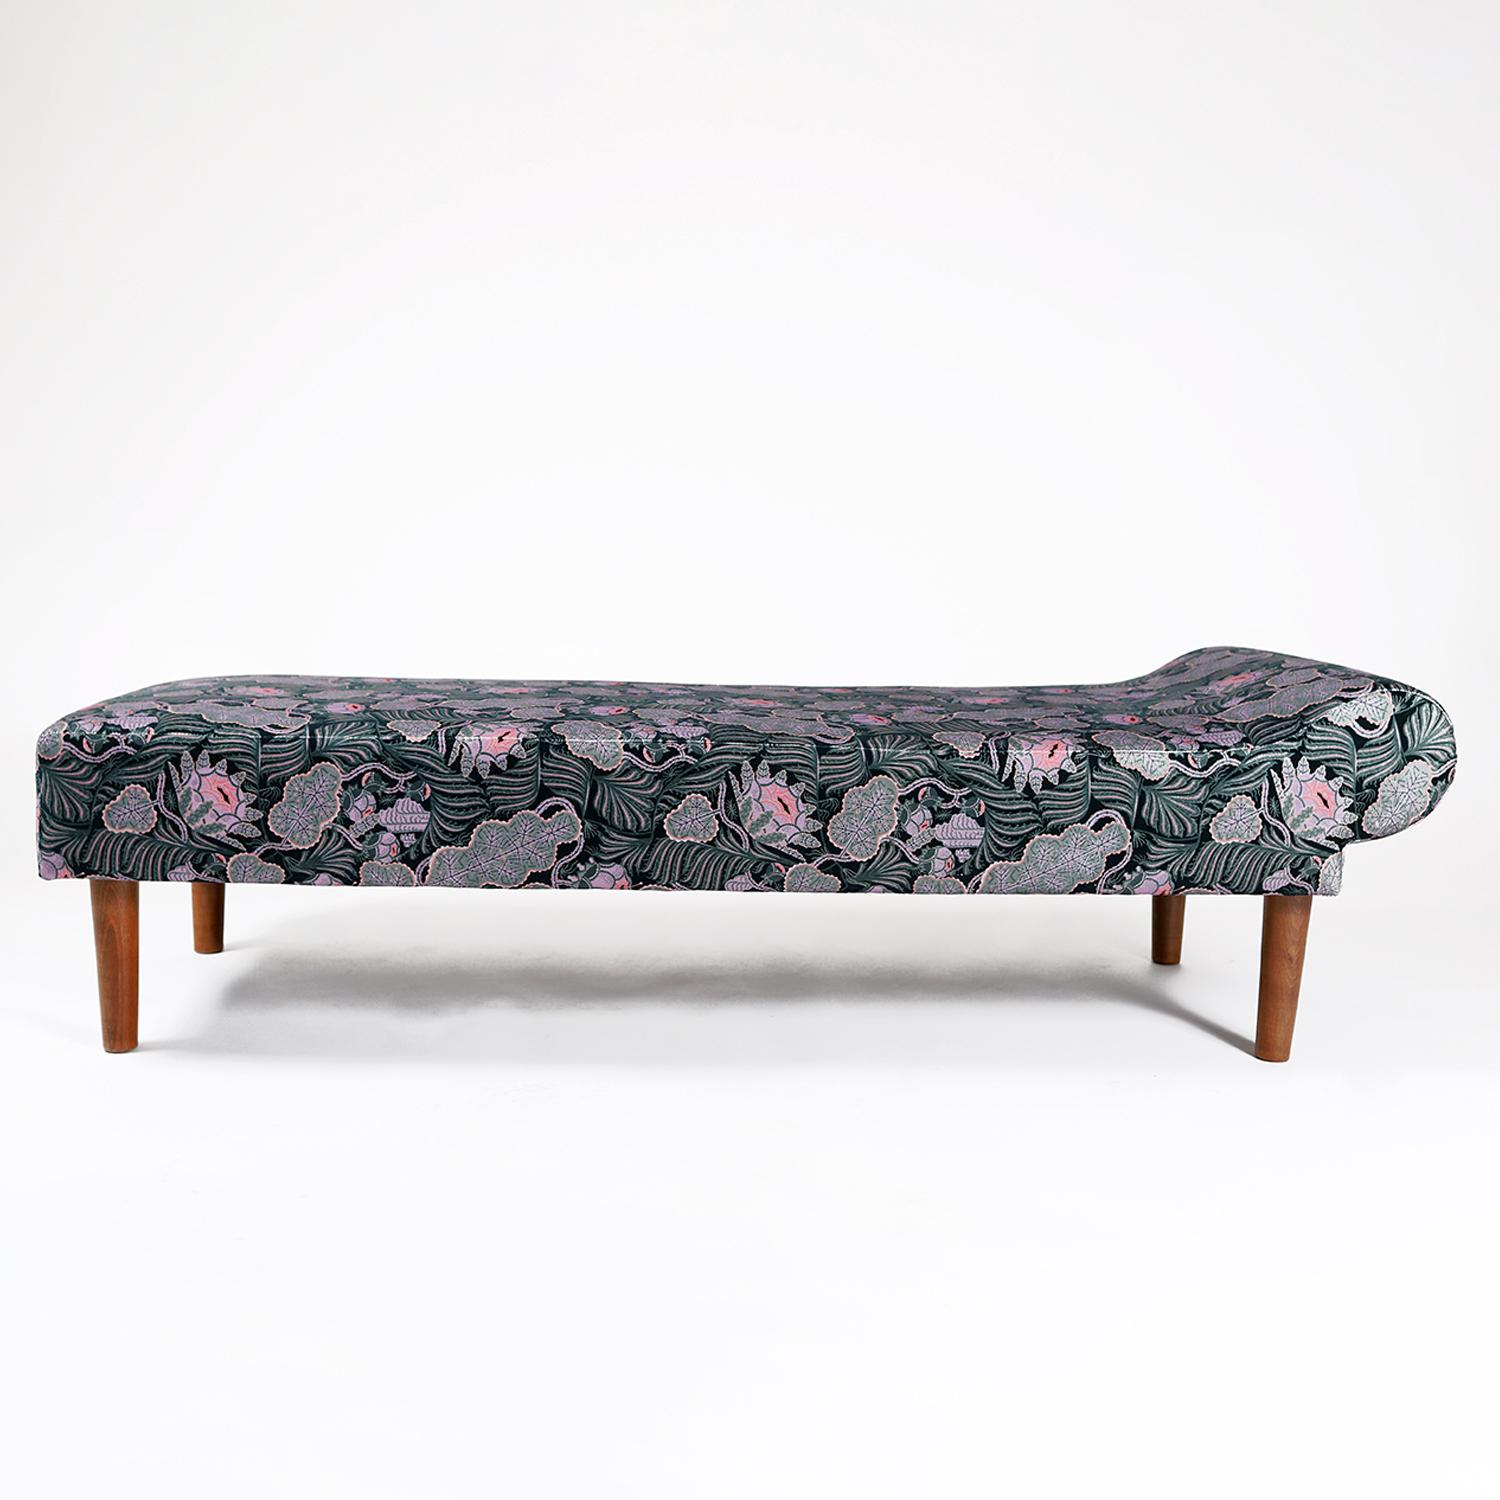 A 1940s Scandinavian designed daybed. Recently reupholstered in a playful textile designed by Klaus Haapaniemi called 